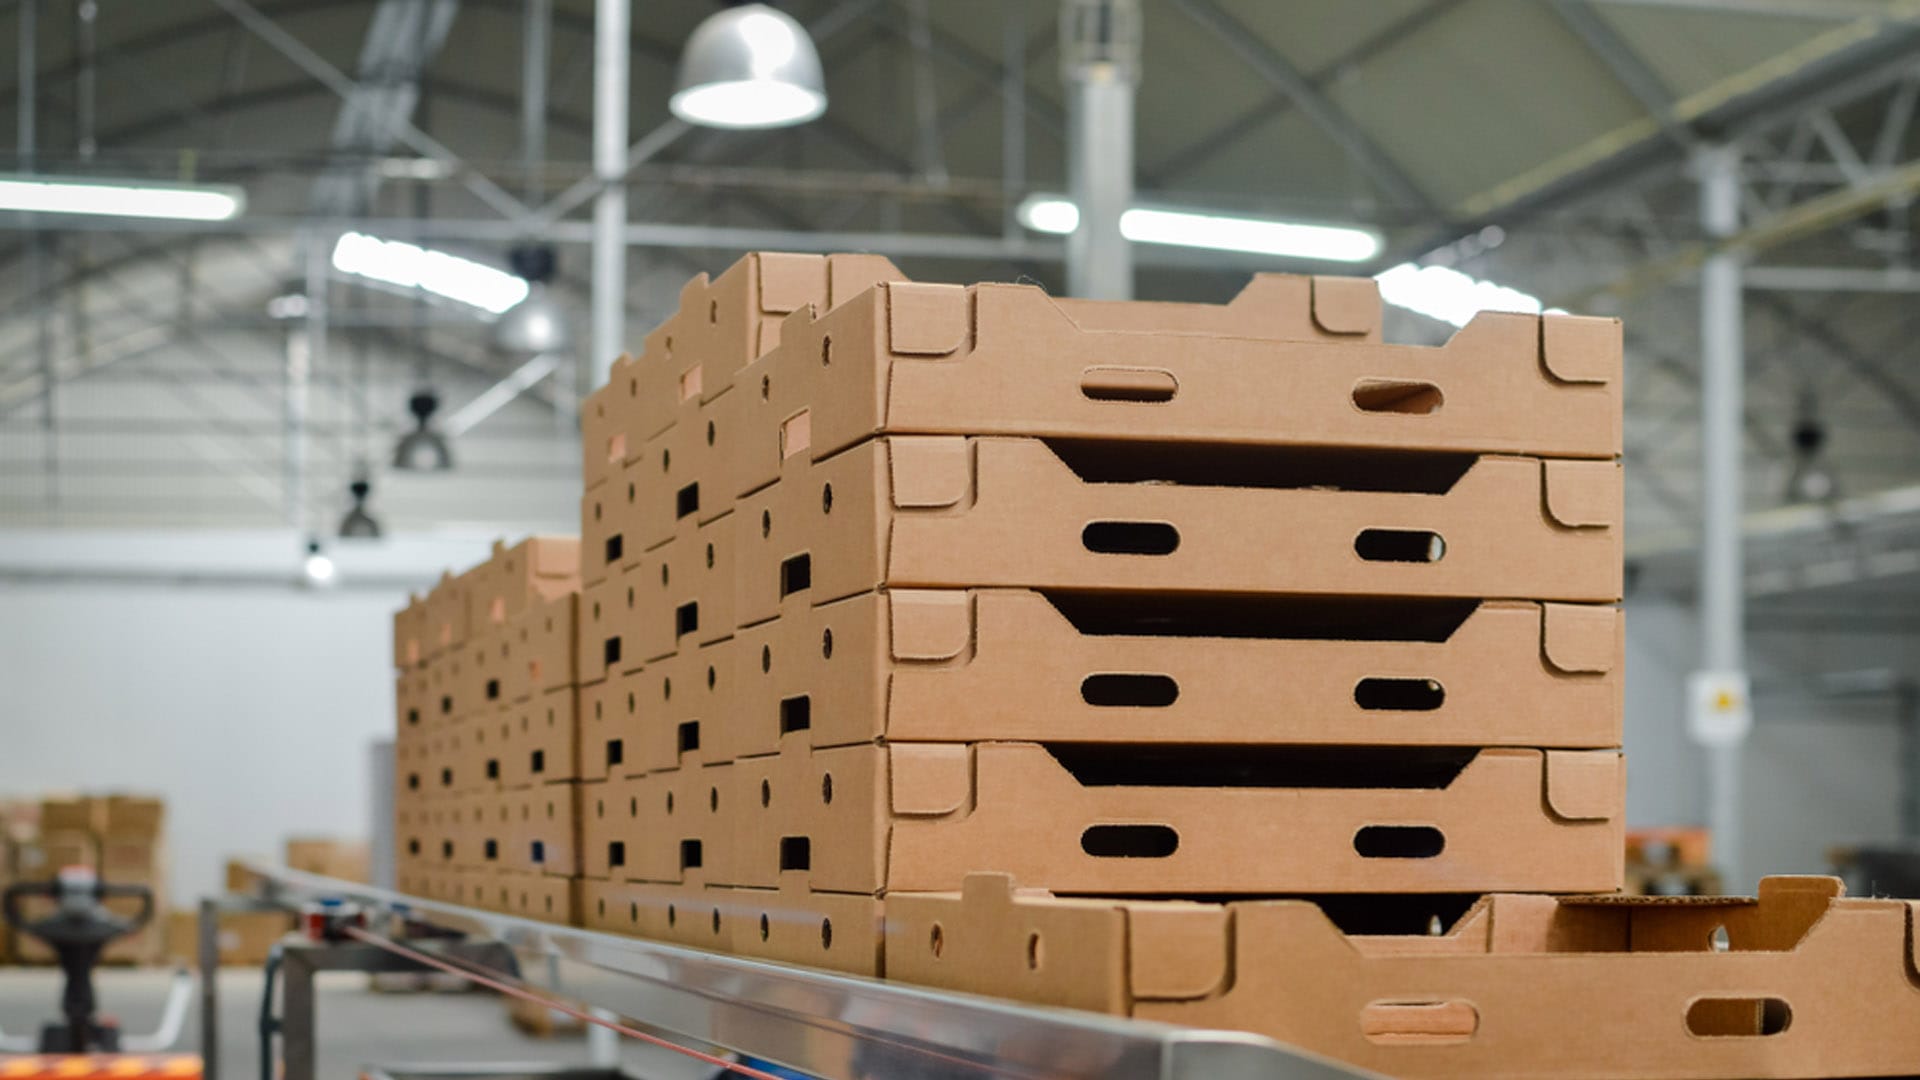 Difference between corrugated and non-corrugated box